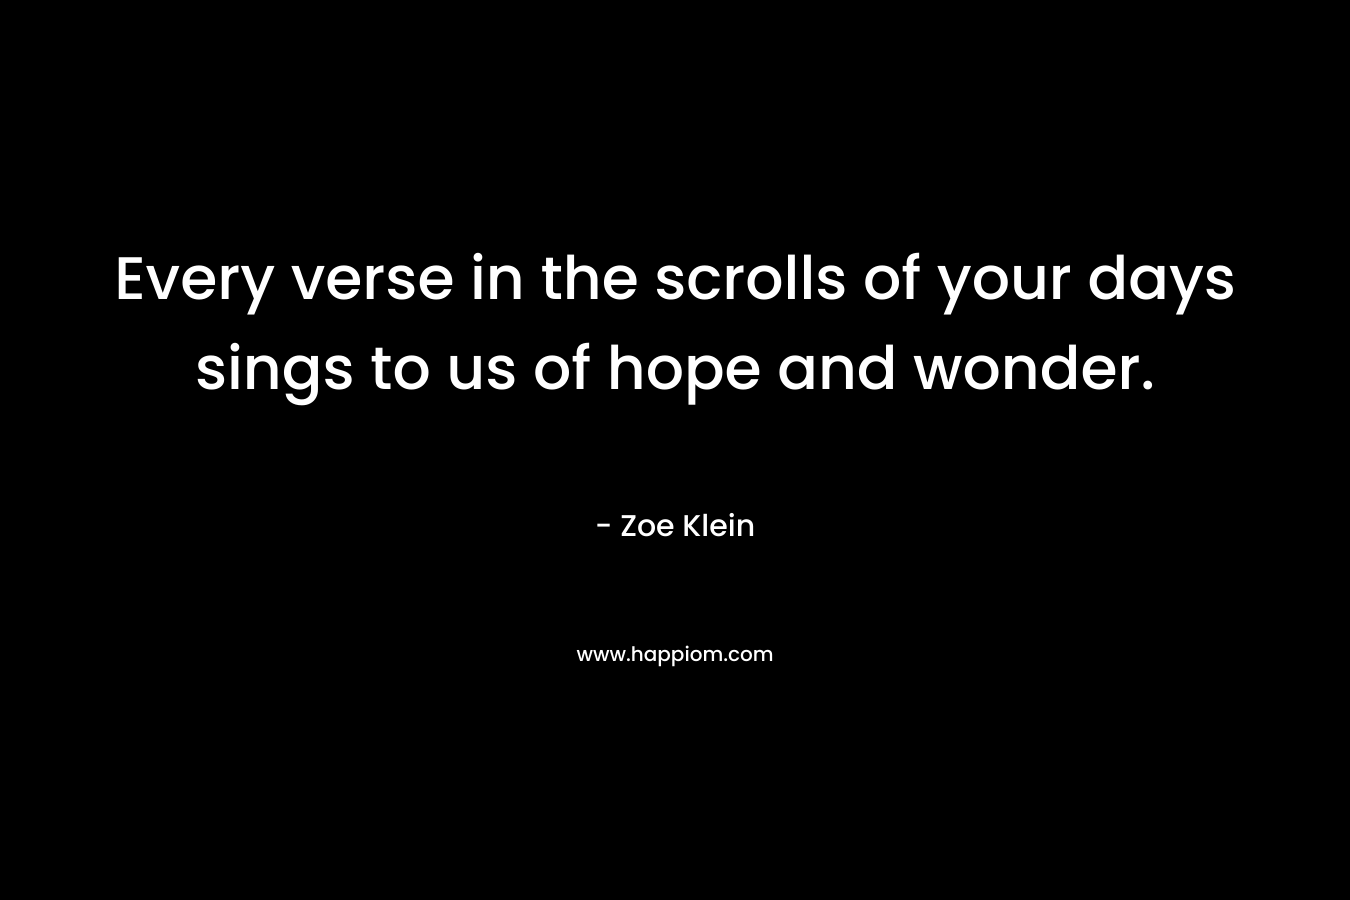 Every verse in the scrolls of your days sings to us of hope and wonder.